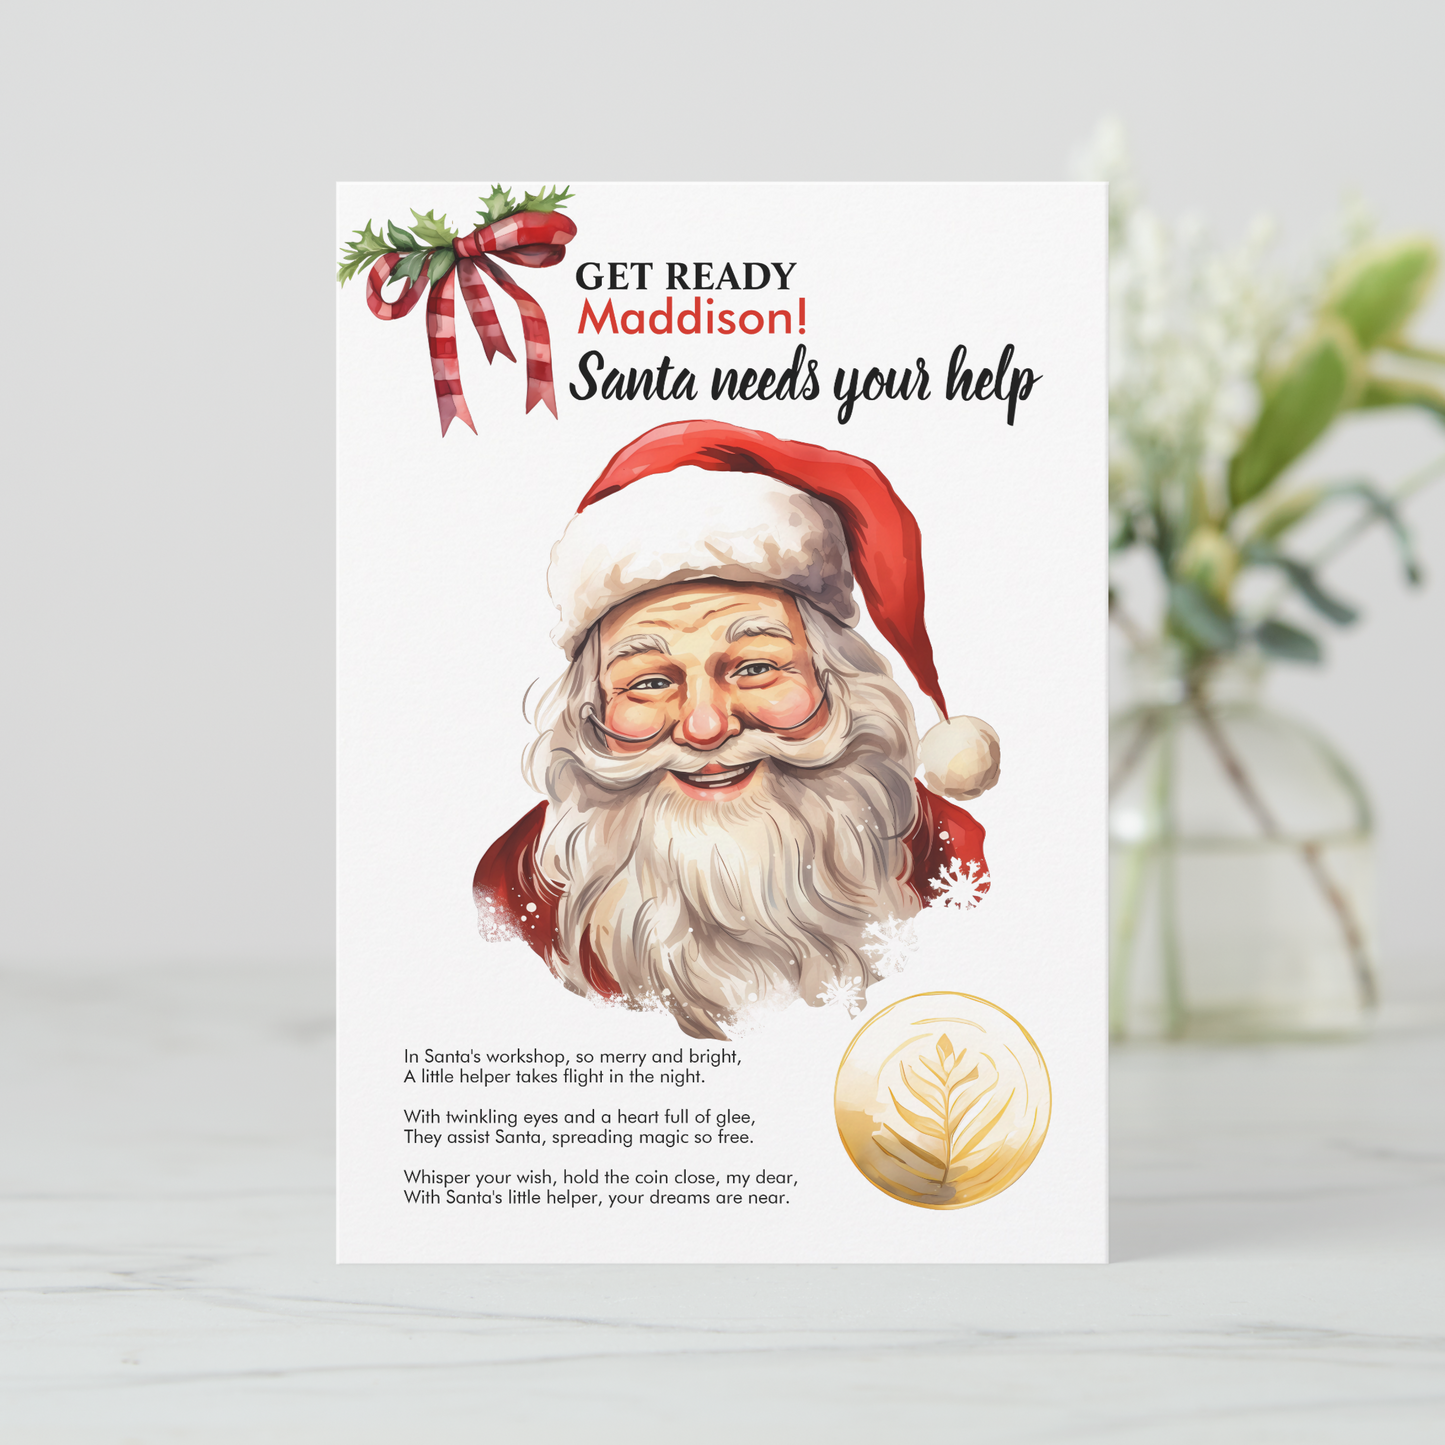 Personalized Santa Needs Your Help Red Magic Wish coin Card for kids christmas eve keepsake stocking gift idea for parents, easy instant digital download printable